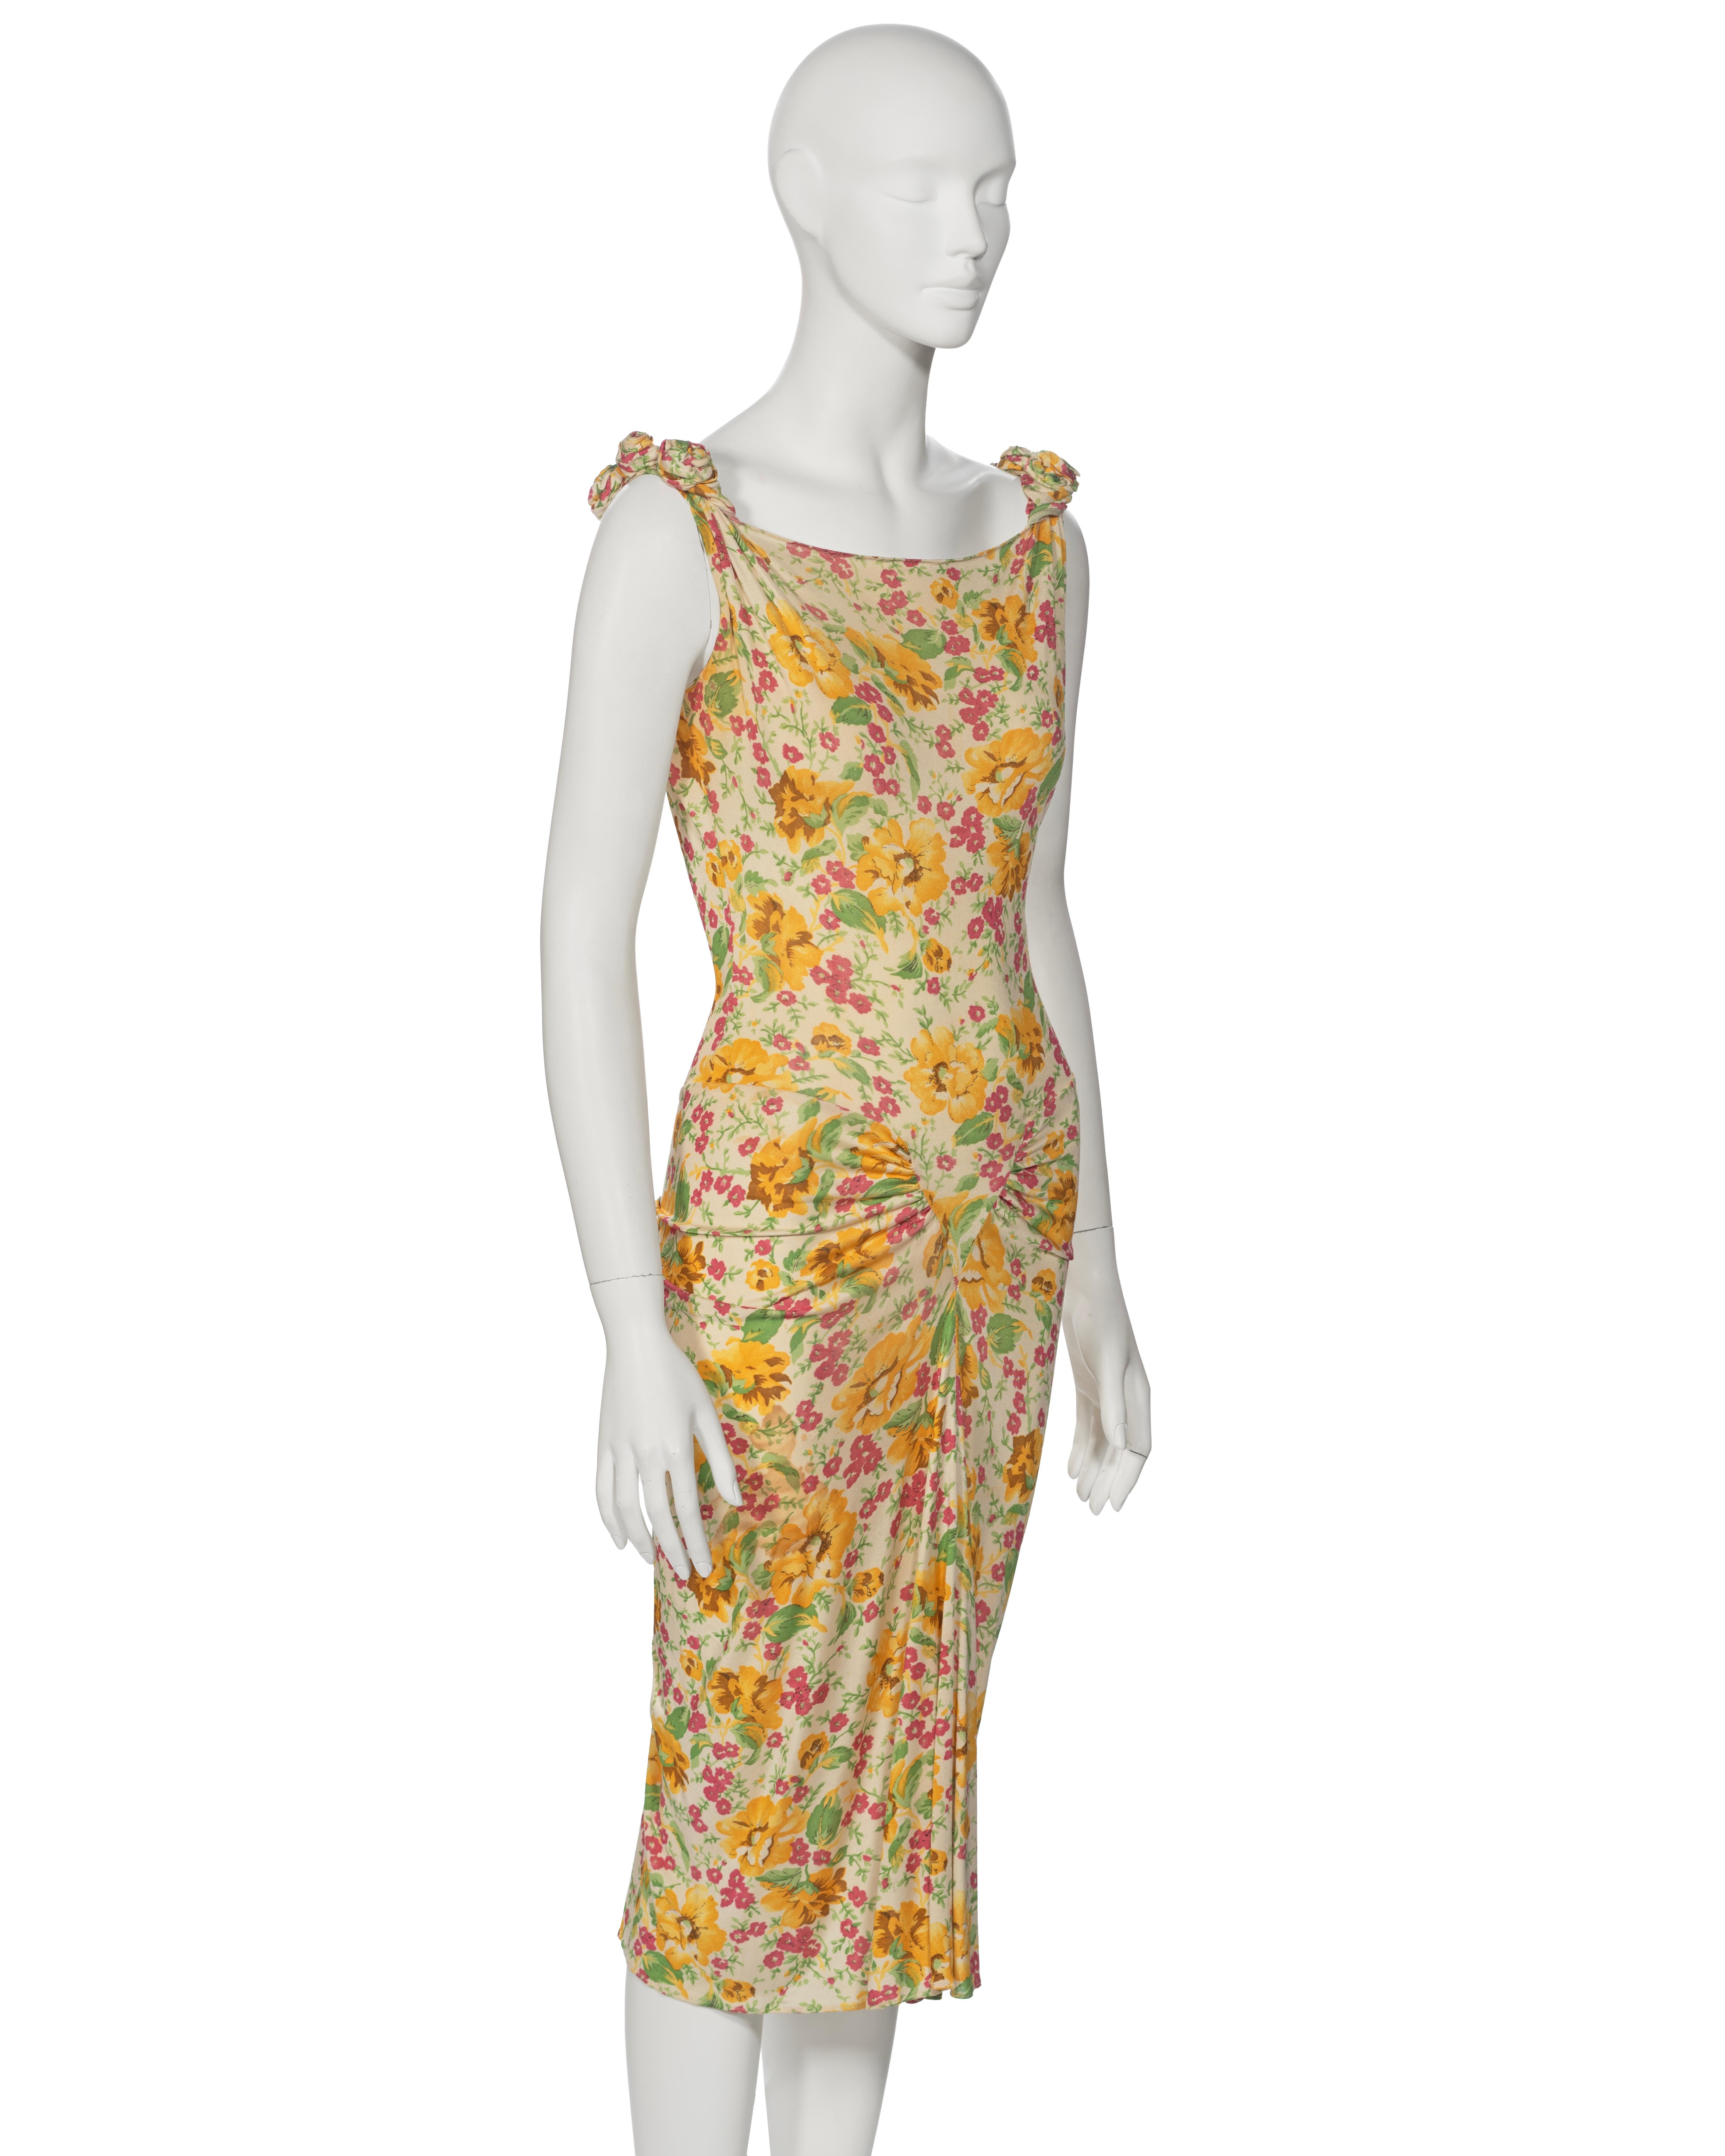 Christian Dior by John Galliano Floral Silk Jersey Cocktail Dress, ss 2000 1